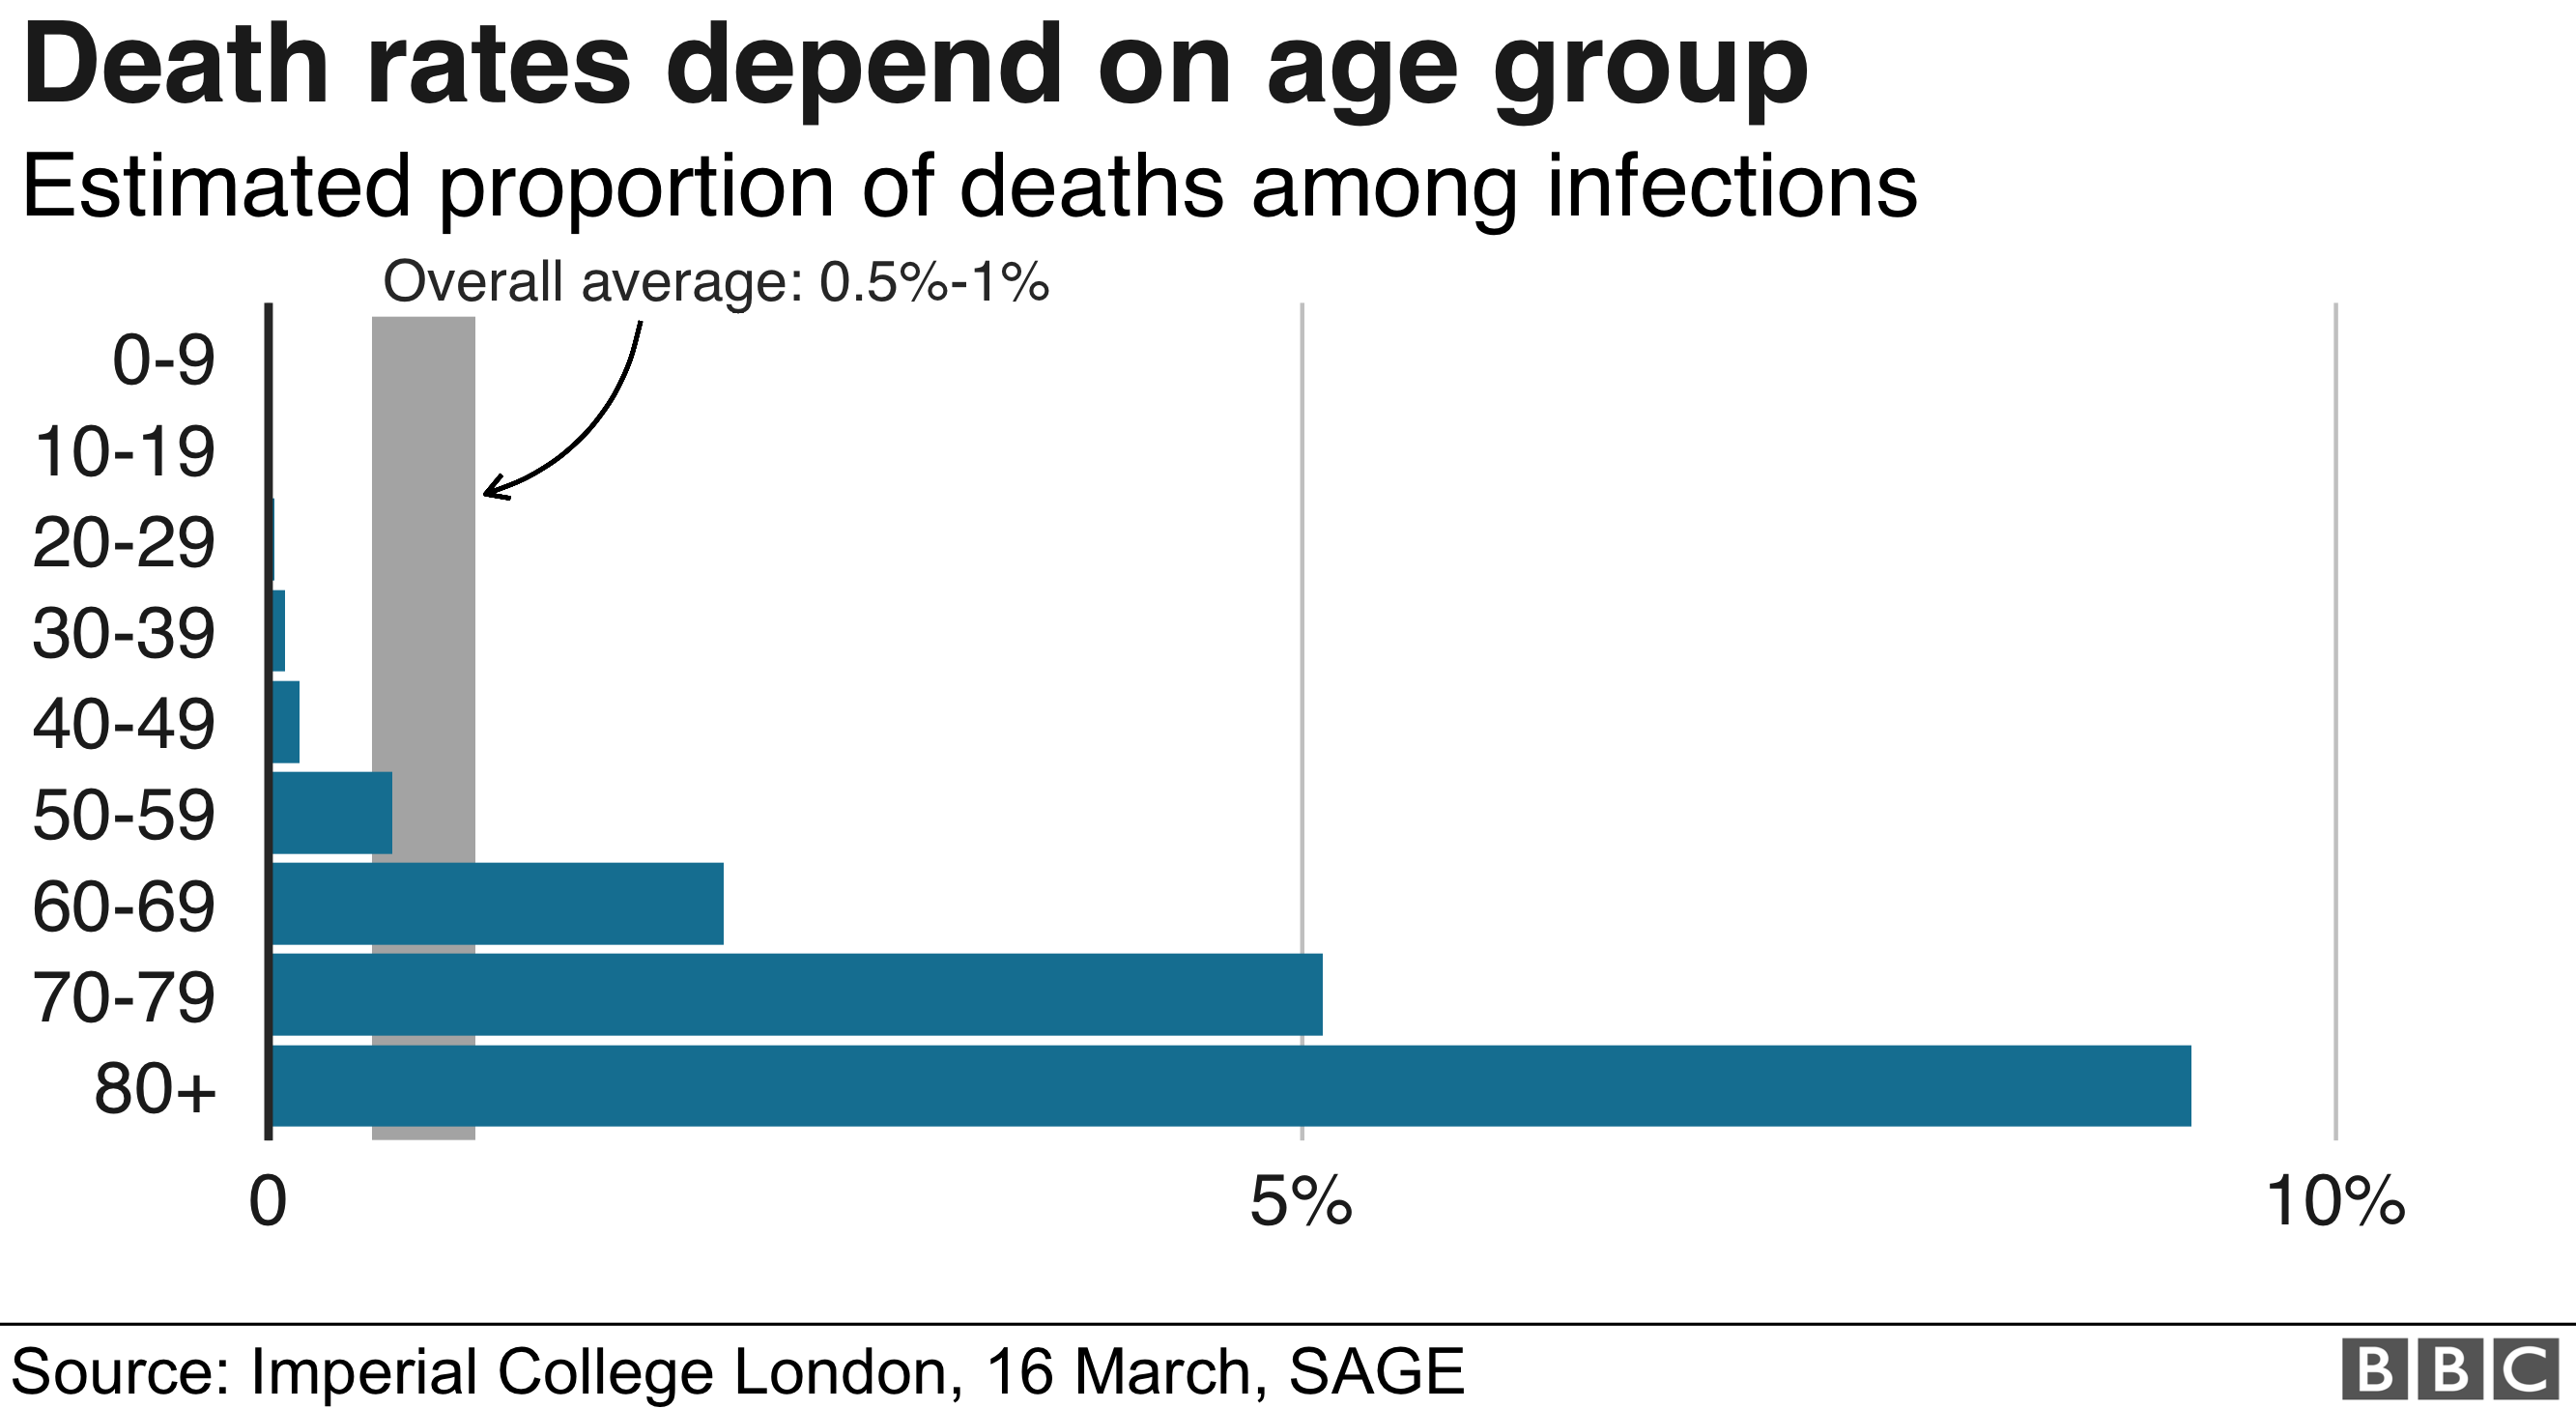 Chart showing death rates for different age group